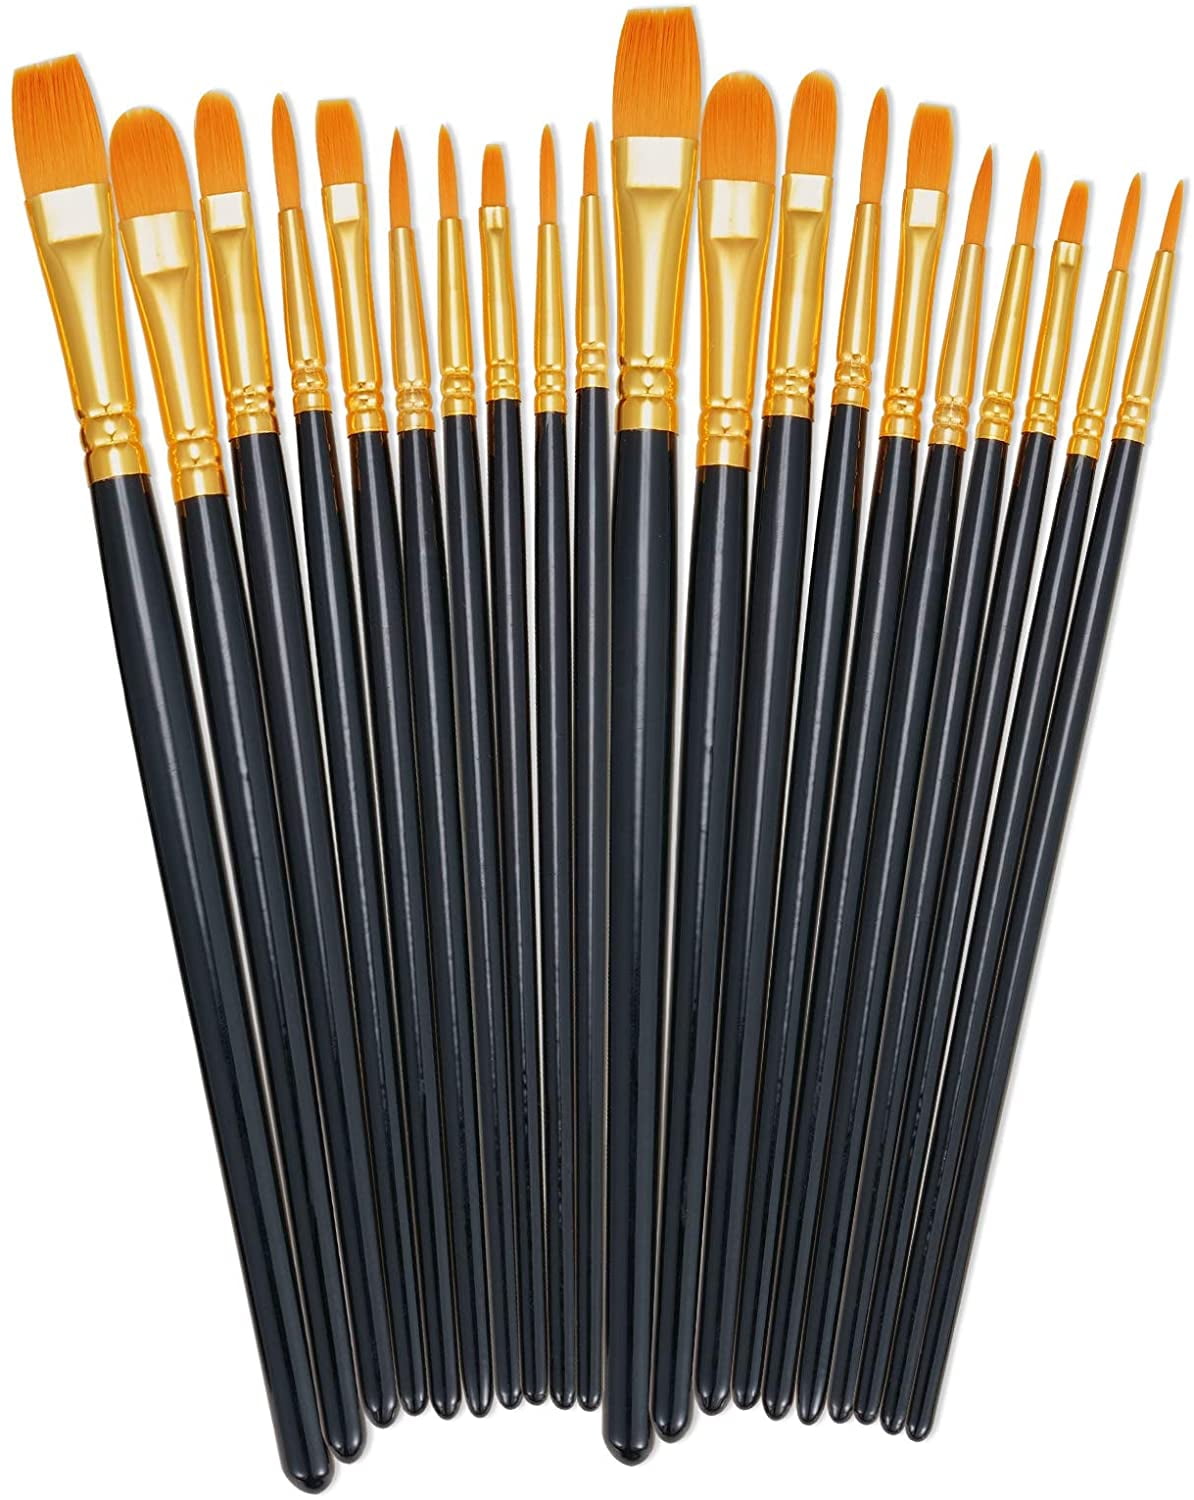 60 Pack Paint Brushes Sets for Acrylic All Purpose Nylon Hair Watercolor Painting Brush Kits Art Crafting